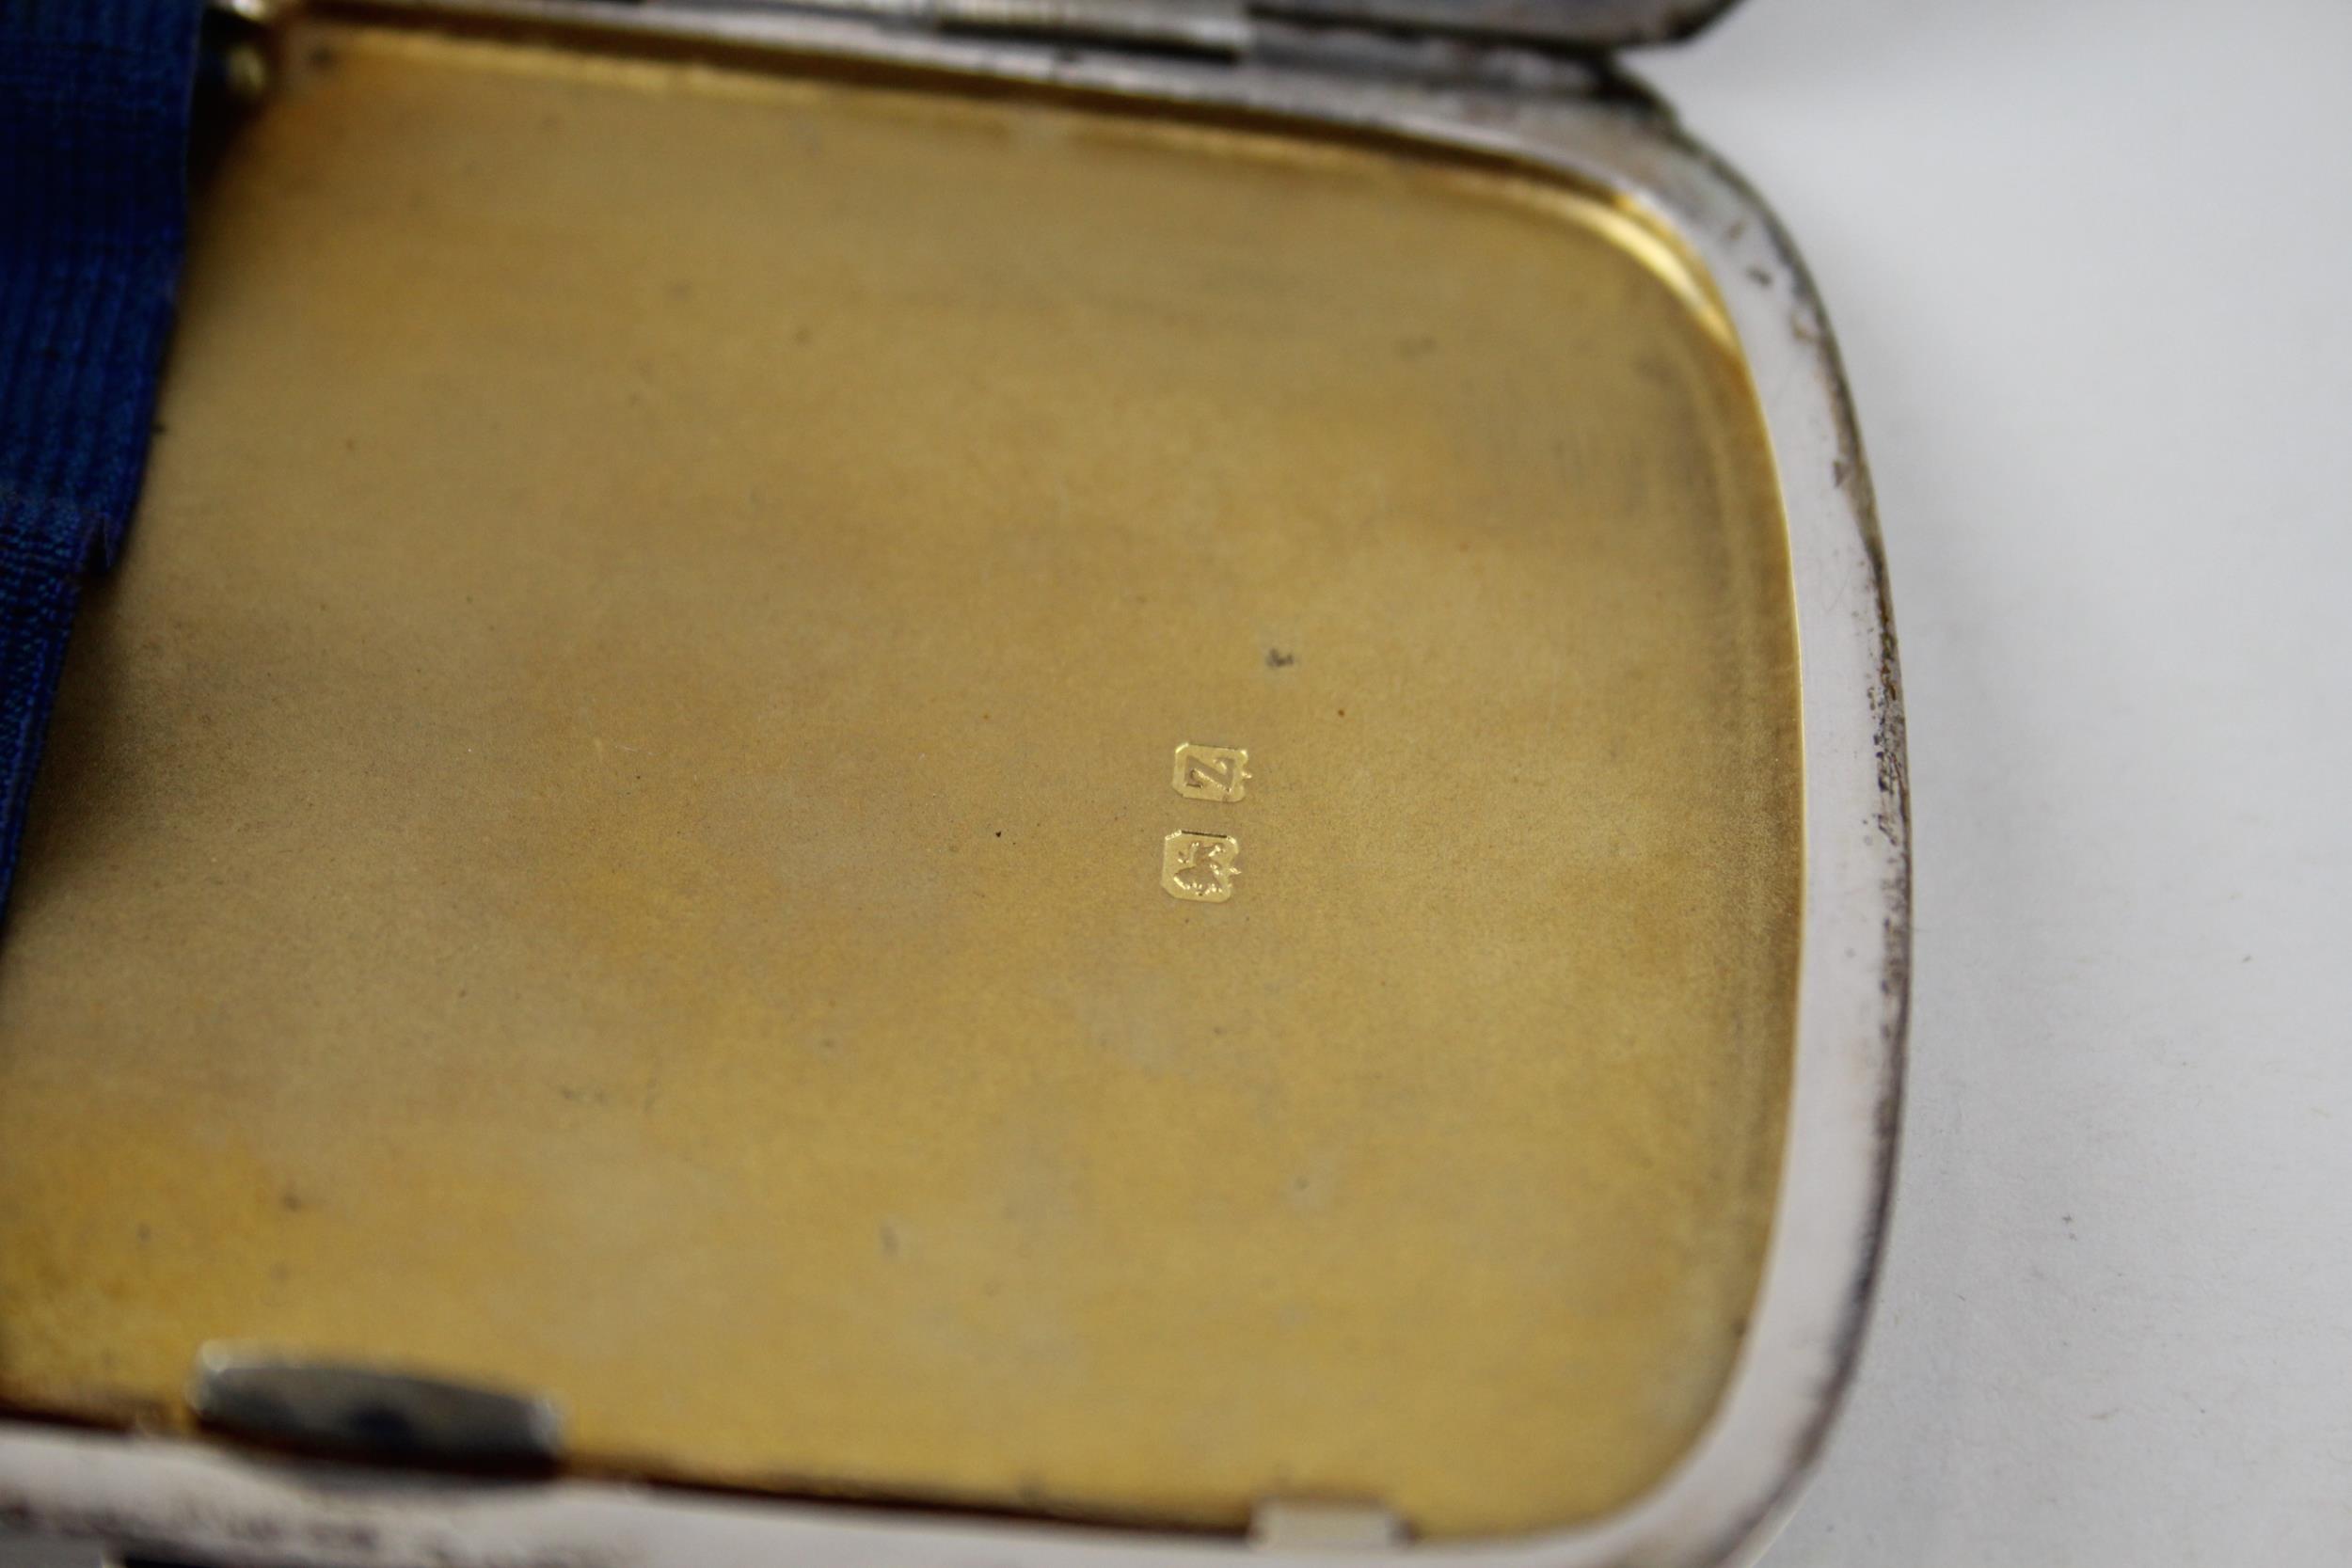 Antique Hallmarked 1924 Birmingham Sterling Silver Cigarette Case (77g) - w/ Personal Engraving - Image 5 of 6